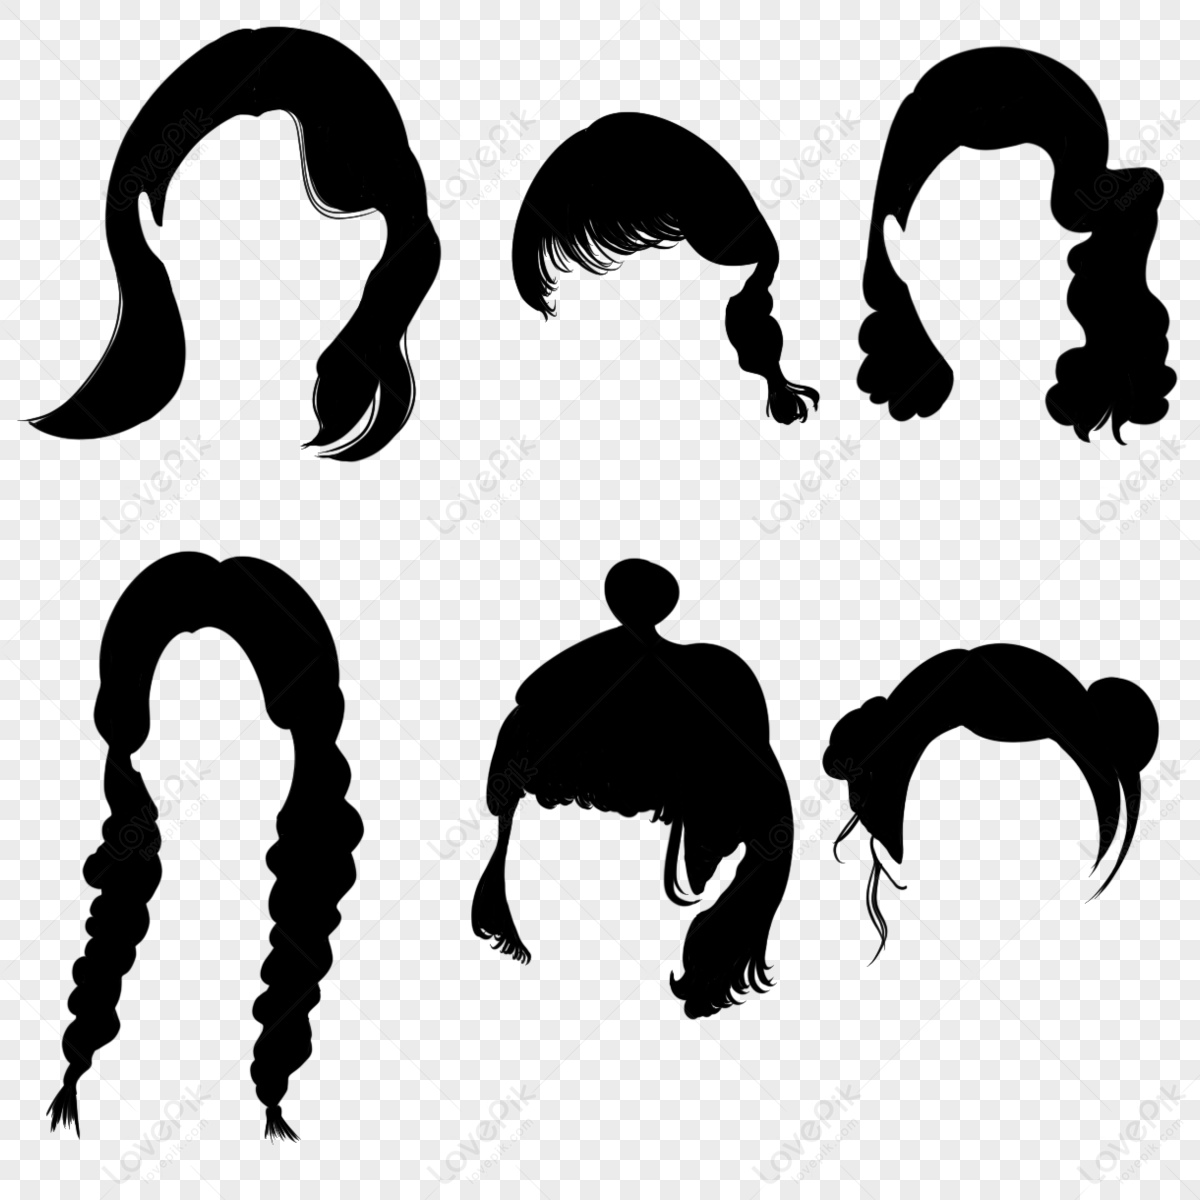 Short Hair Woman Silhouette PNG Free, Hairstyle Dress Up Black Short Hair,  Haircut, Hairstyle Dress Up, Silhouette PNG Image For Free Download